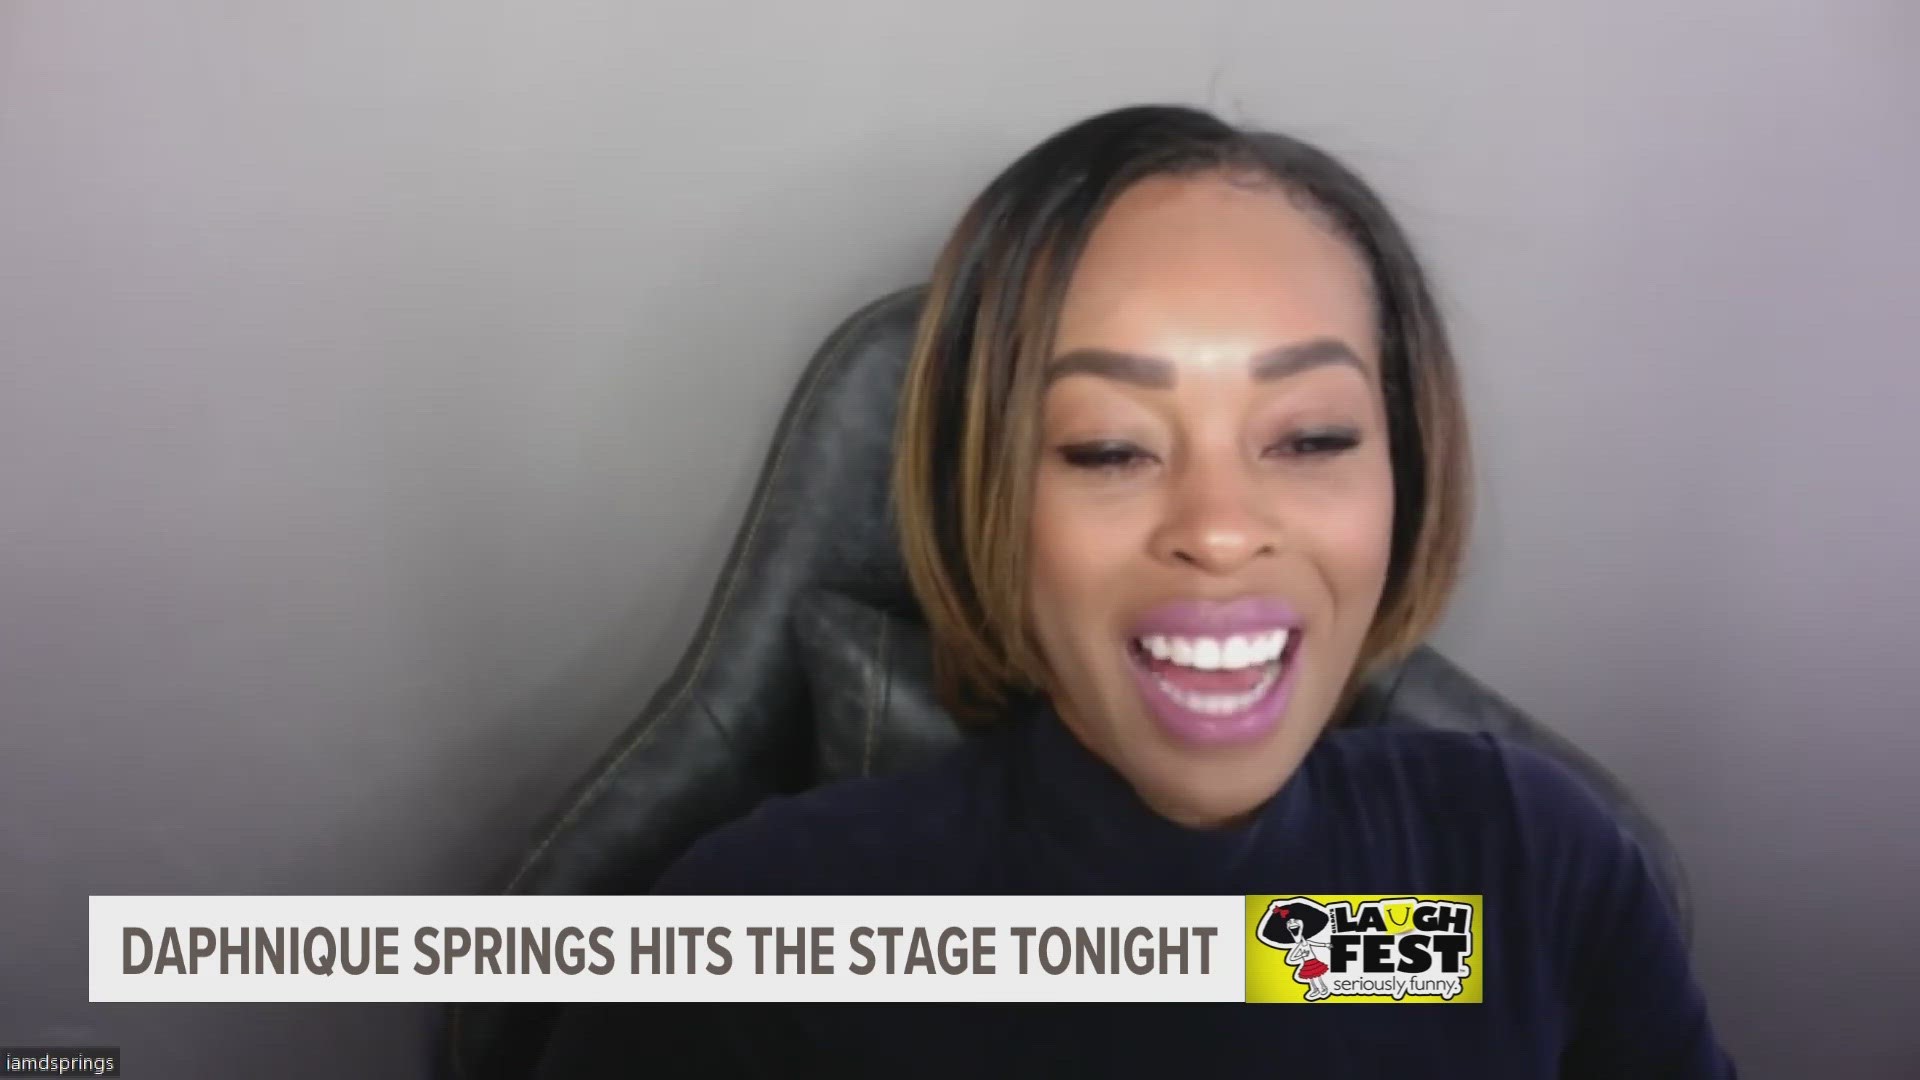 The LA-based comedian has been on Jimmy Kimmel Live, Last Call with Carson Daly, and All Def Comedy. She says she's thrilled to come back to Michigan.